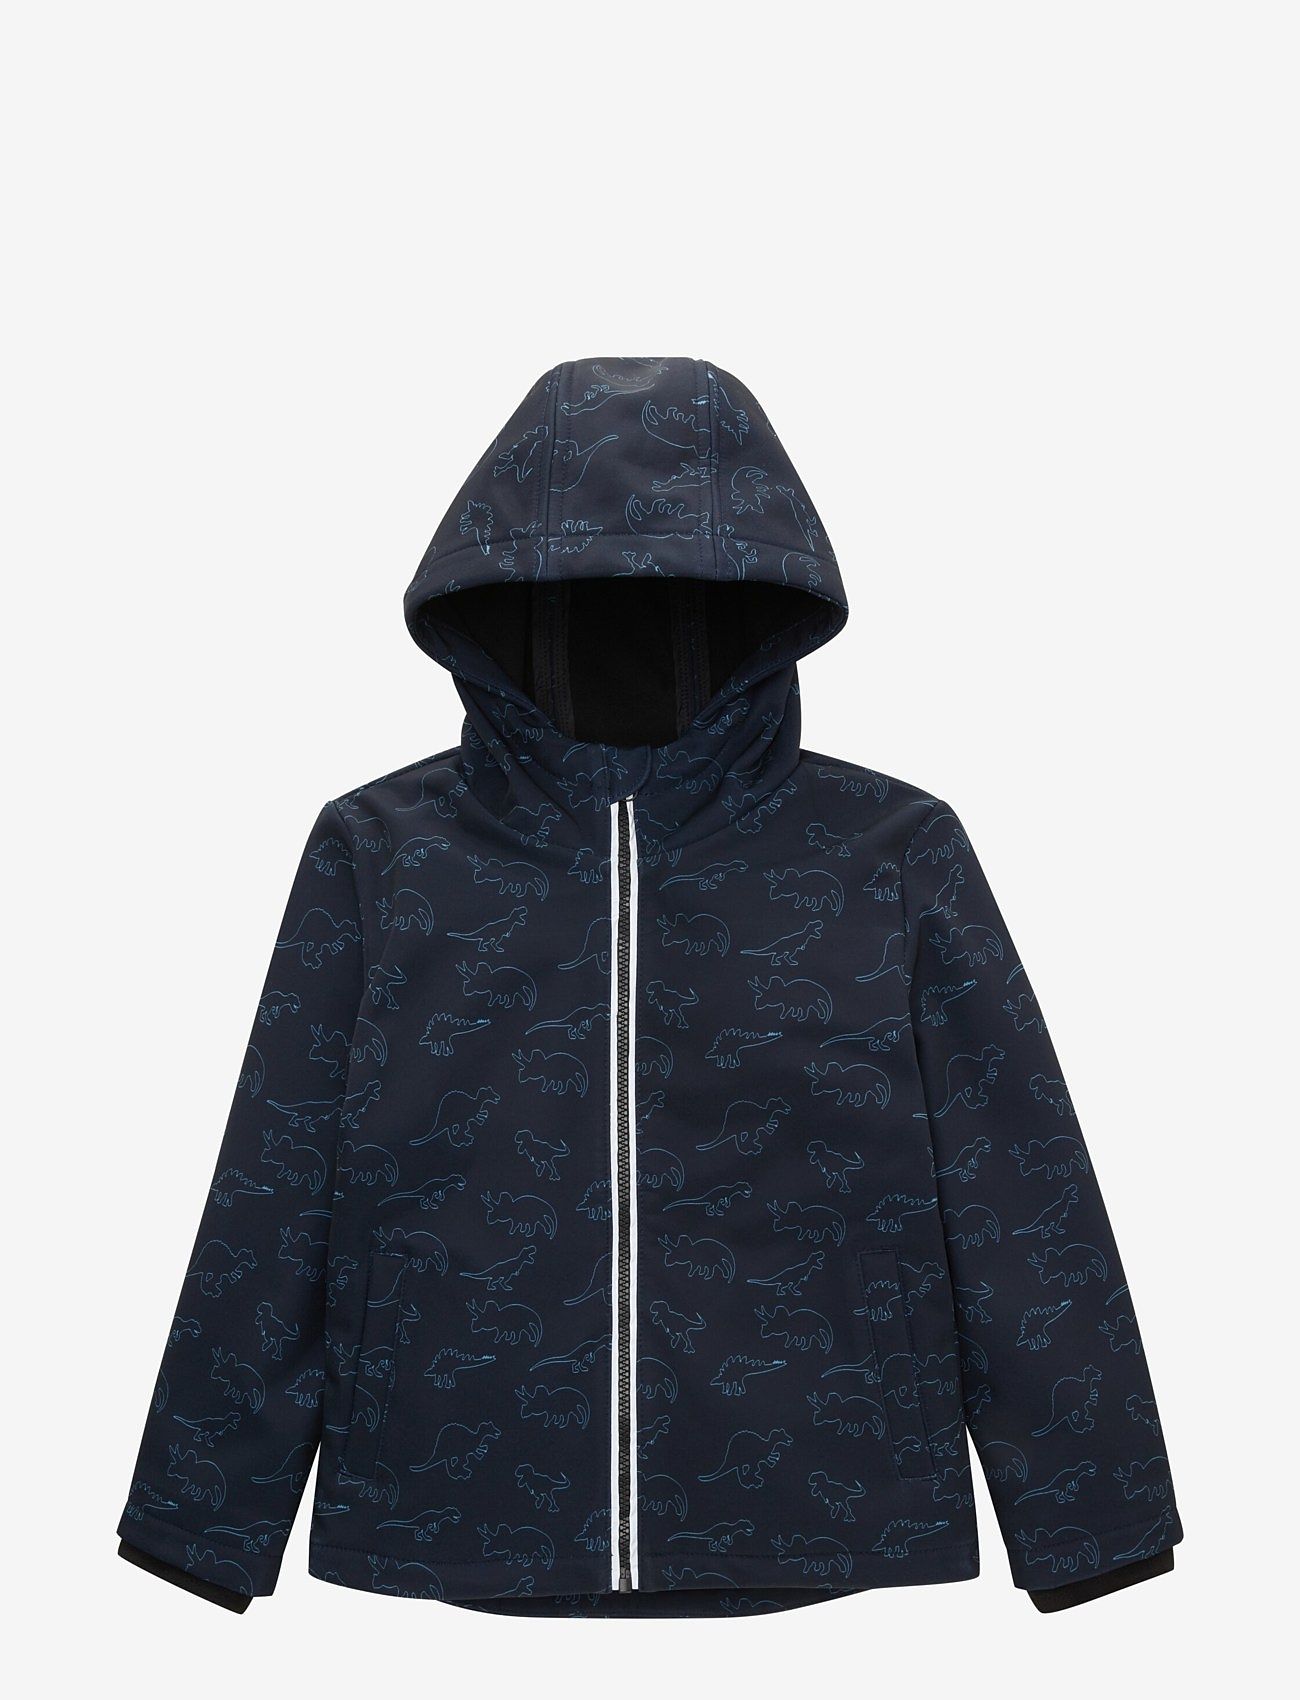 Tom Tailor - softshell jacket - lapsed - navy blue outlined dino aop - 0